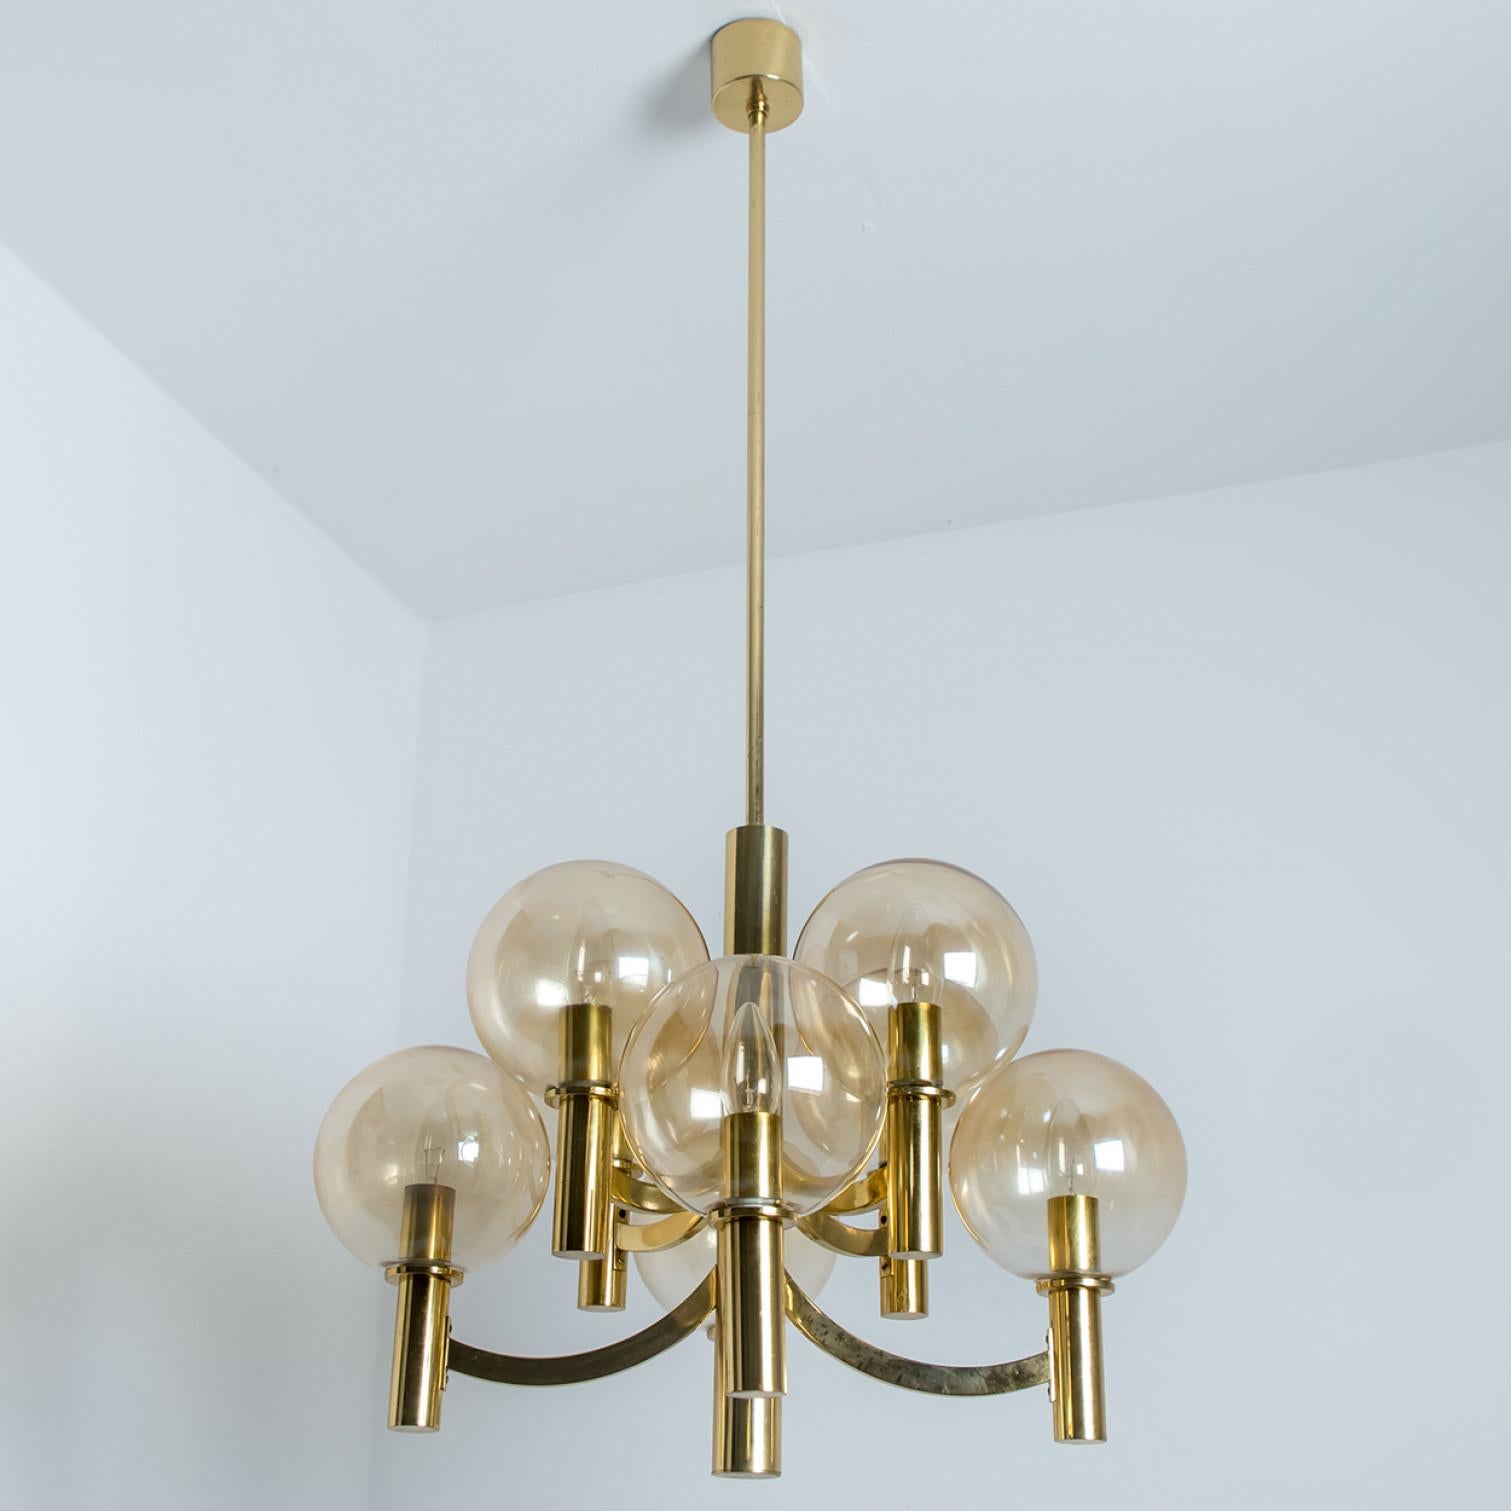 Wonderful chandelier with clear glass bowls and a brass base and fittings. Produced in the 1970s in the style of Hans-Agne Jakobsson. Illuminates beautifully.

Dimensions:
Height: 43.30